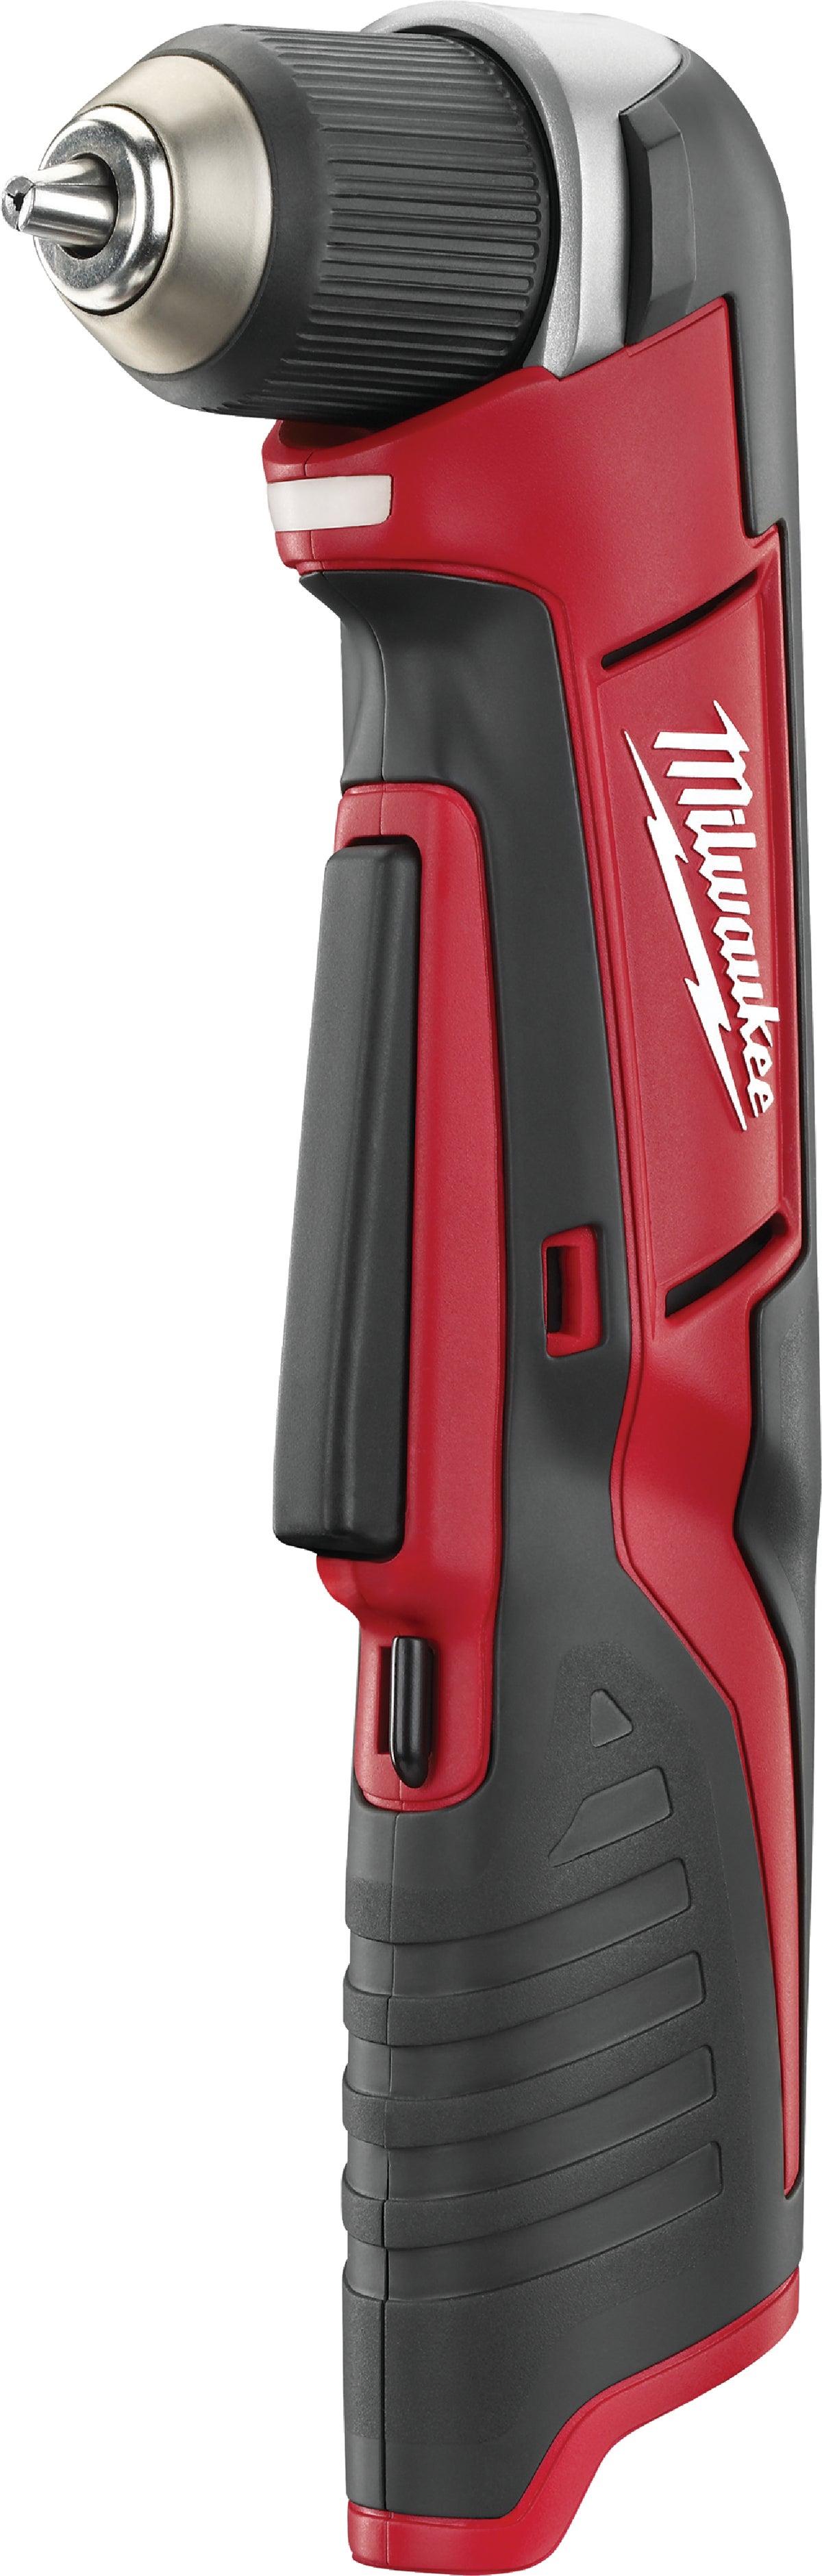 MW M12 Lithium-Ion Cordless Angle Drill